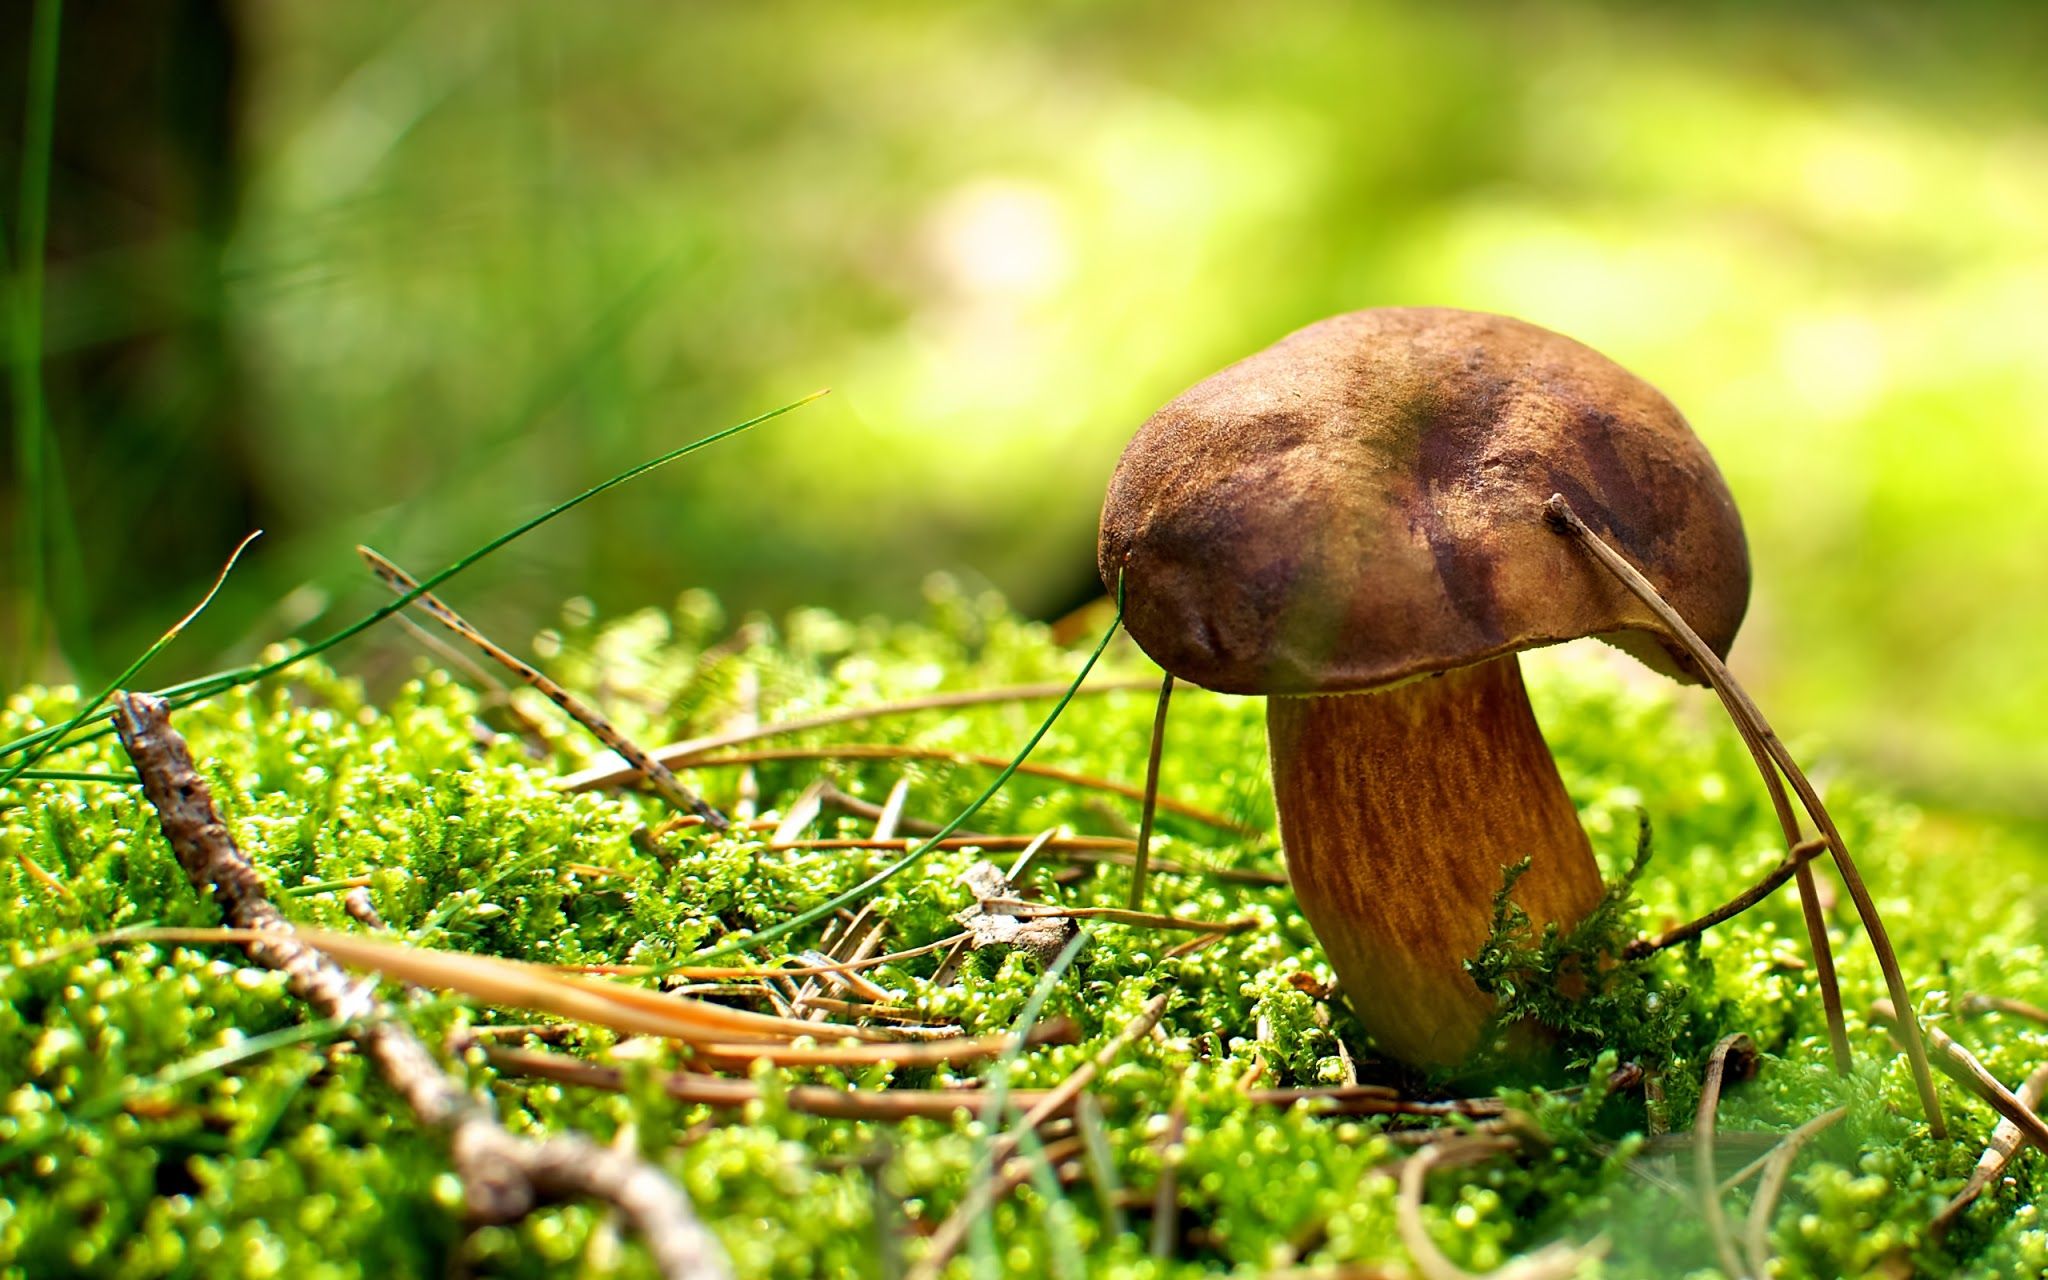 Mushroom Growing Out of the Moss on Forest Floor